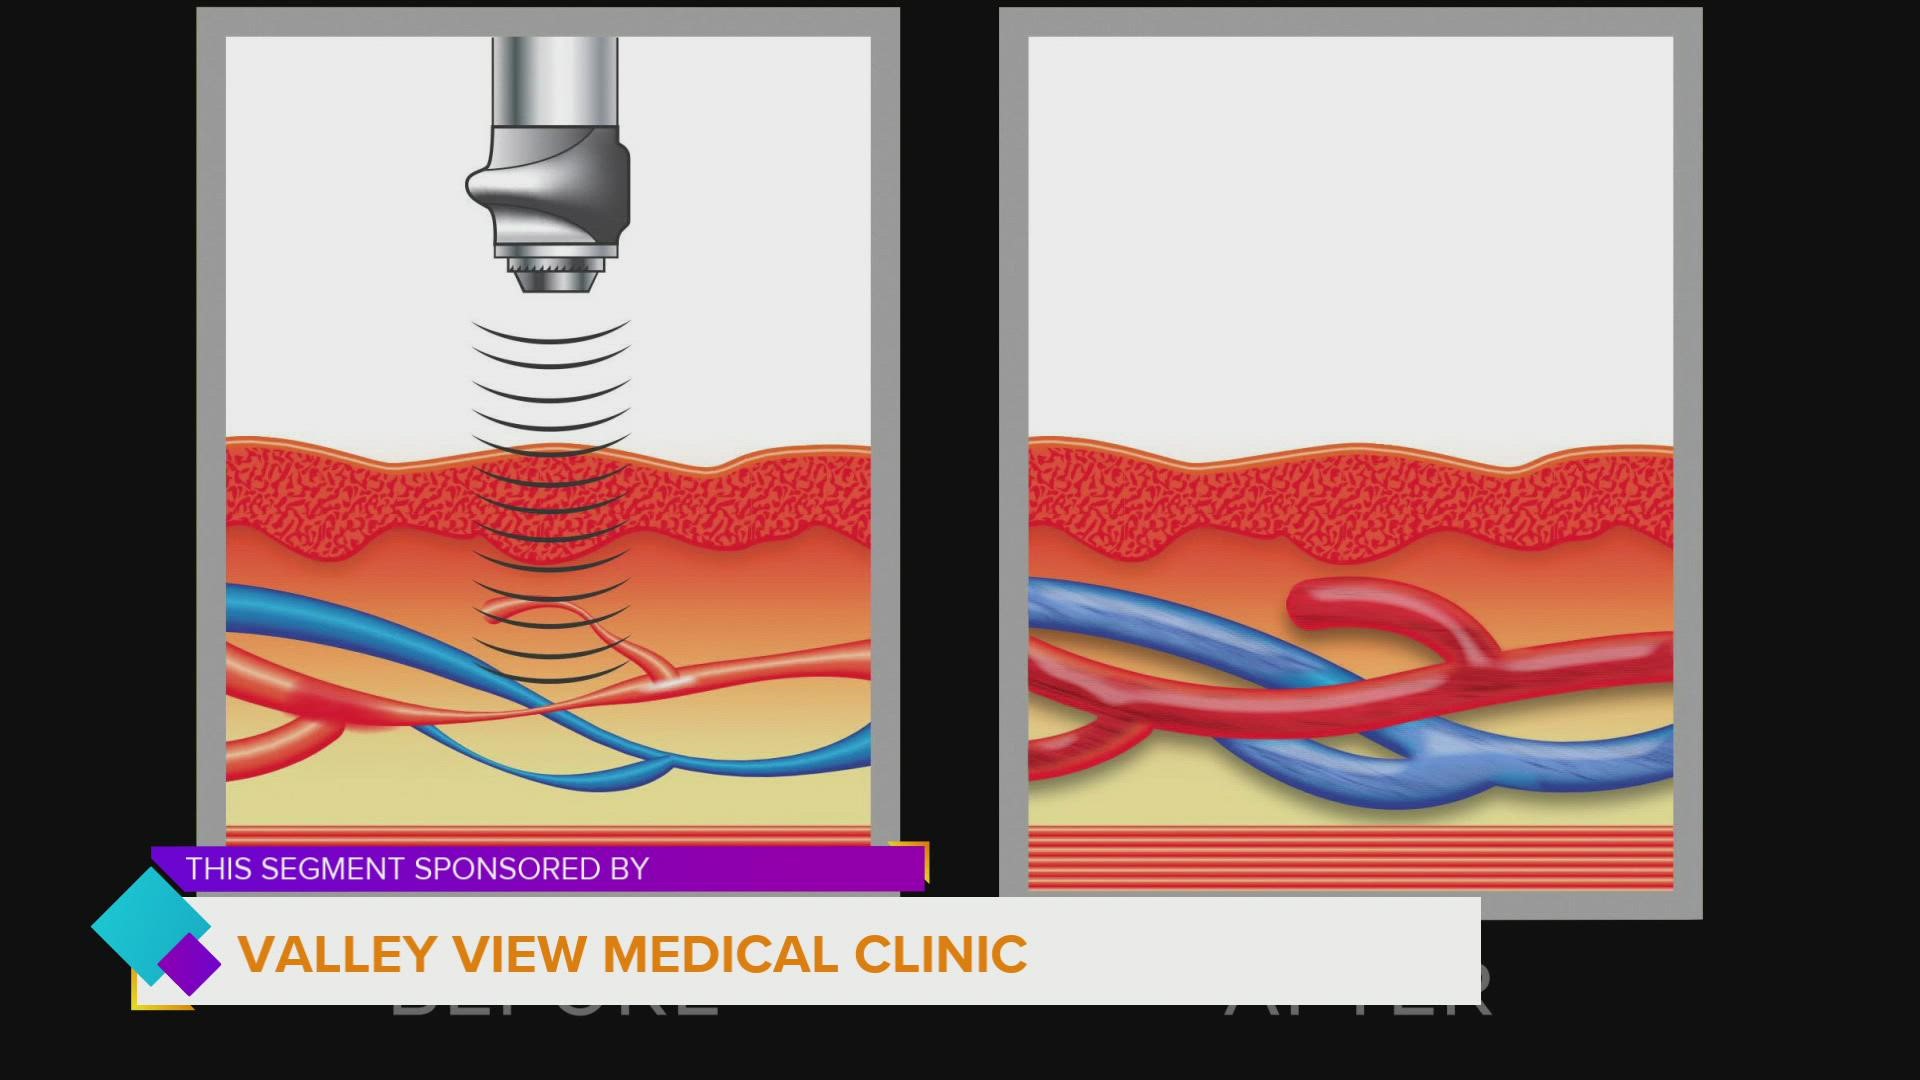 Valley View Medical Clinic uses the latest Acoustic Wave Therapy to treat patients 6 days a week | Paid Content